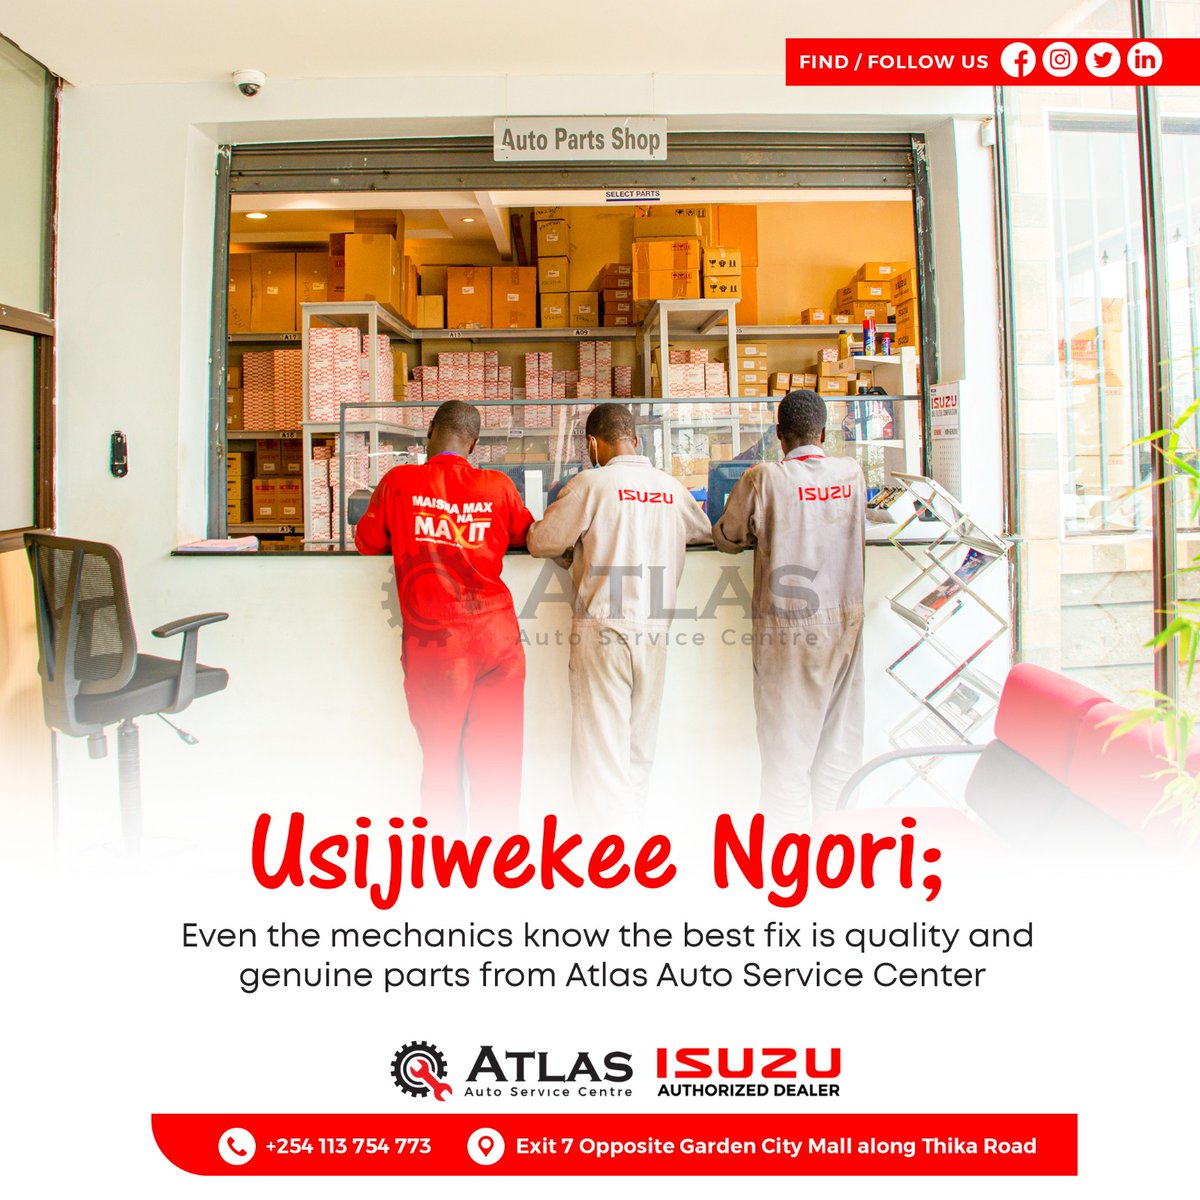 What's the best fix for your car? Our mechanics say quality, genuine parts from Atlas Auto Service Centre! 🔧🛠️Agree? Let us know in the comments! #howcanwehelp #garage #isuzuxtay  #Genuinesolutions #AtlasAutoCentre #CarCare #Nairobi #Haitian #SingleKiasi #BrianChira #Kenyans